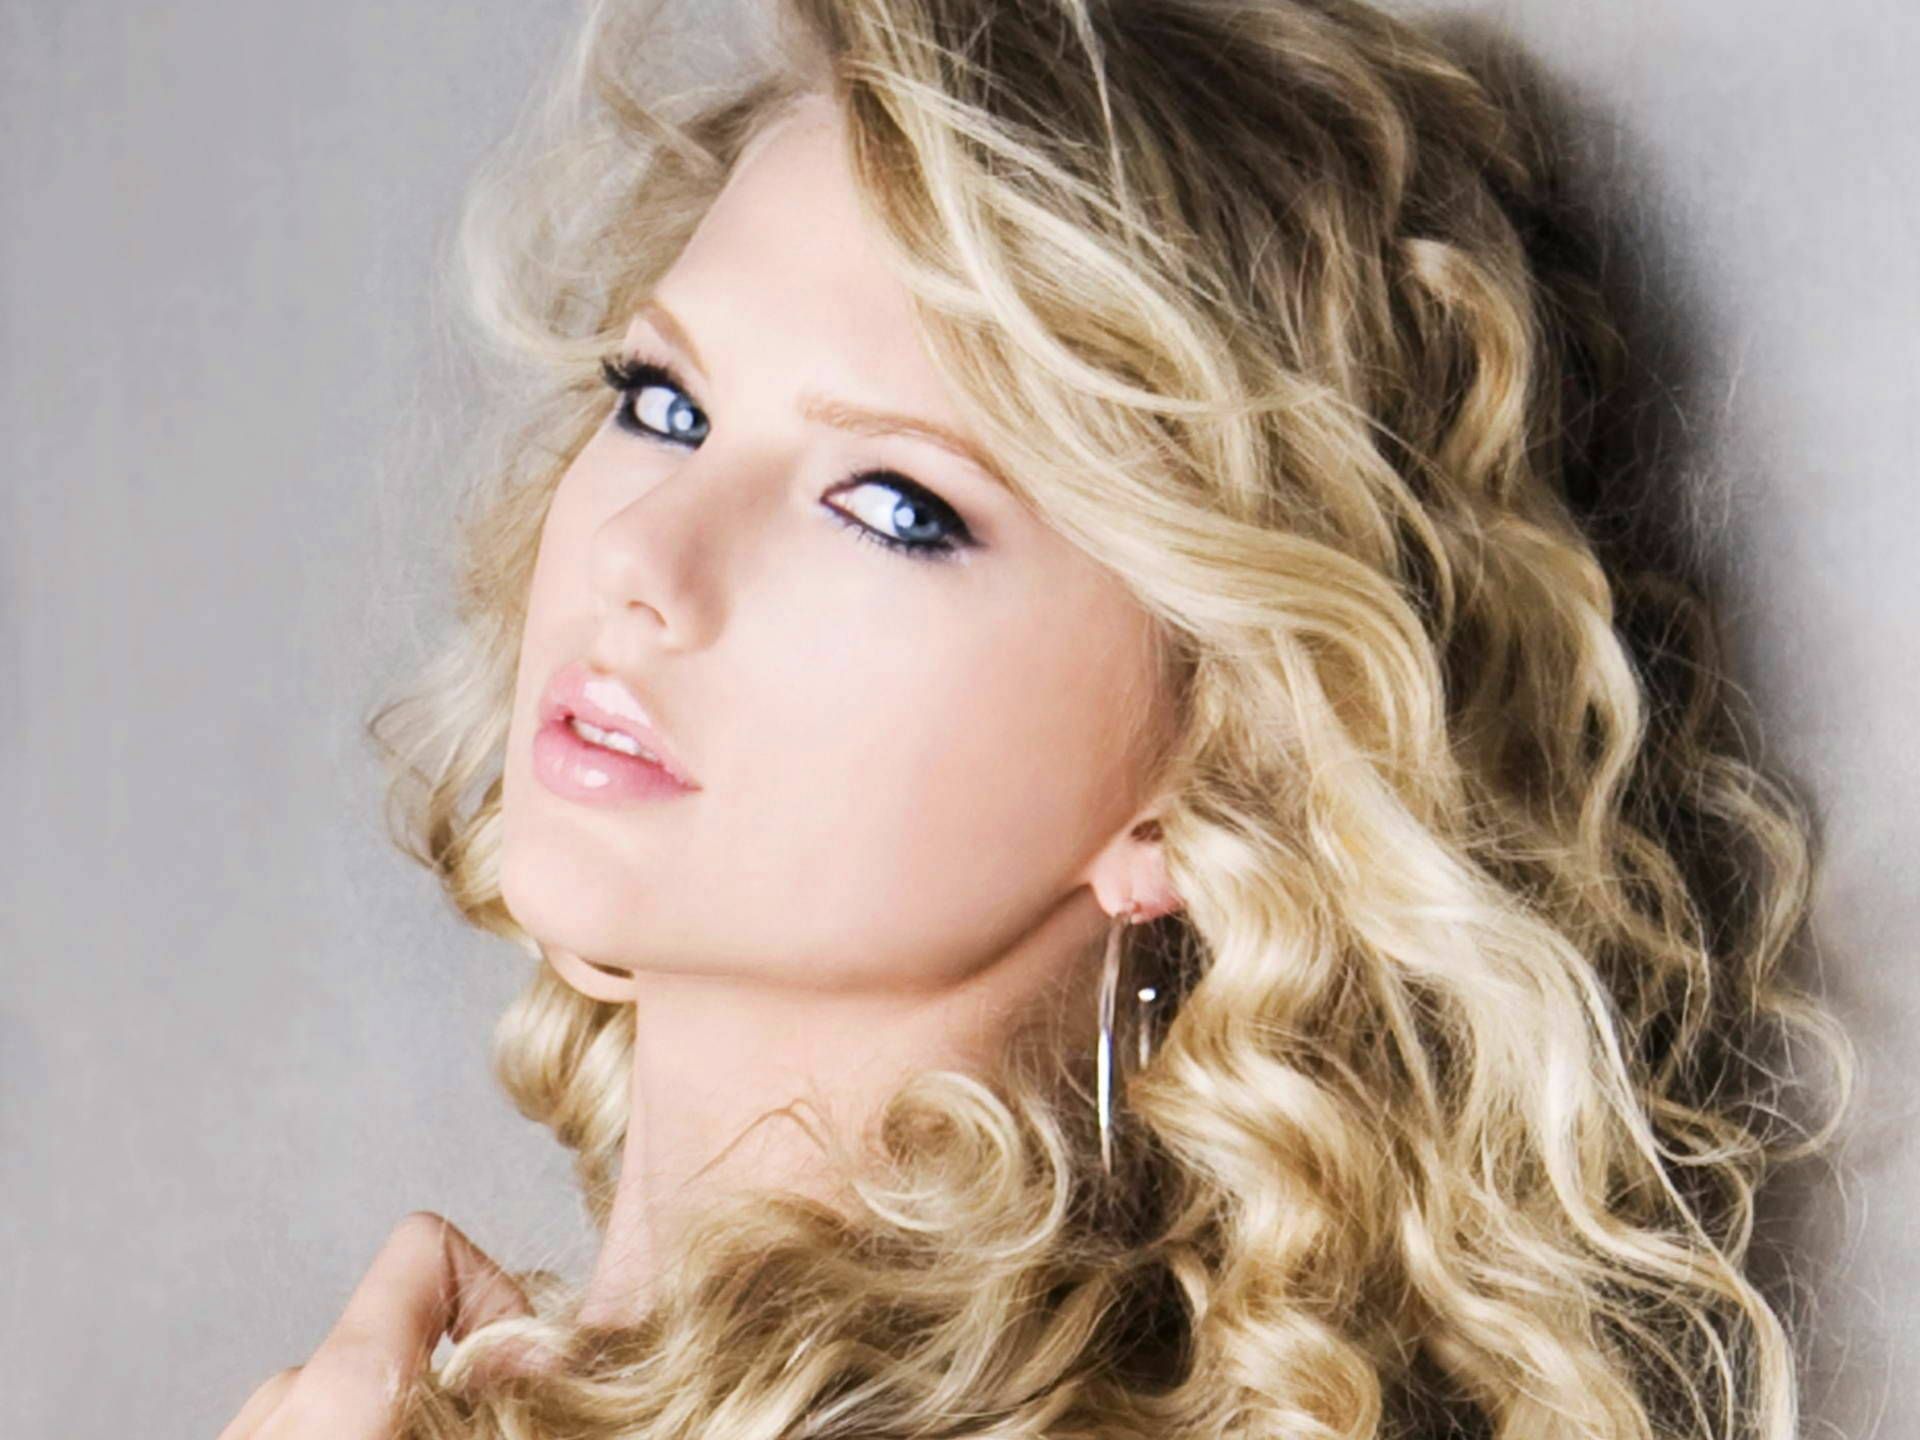 Taylor Swift Hot wallpapers - Hot wallpapers of Taylor Swift